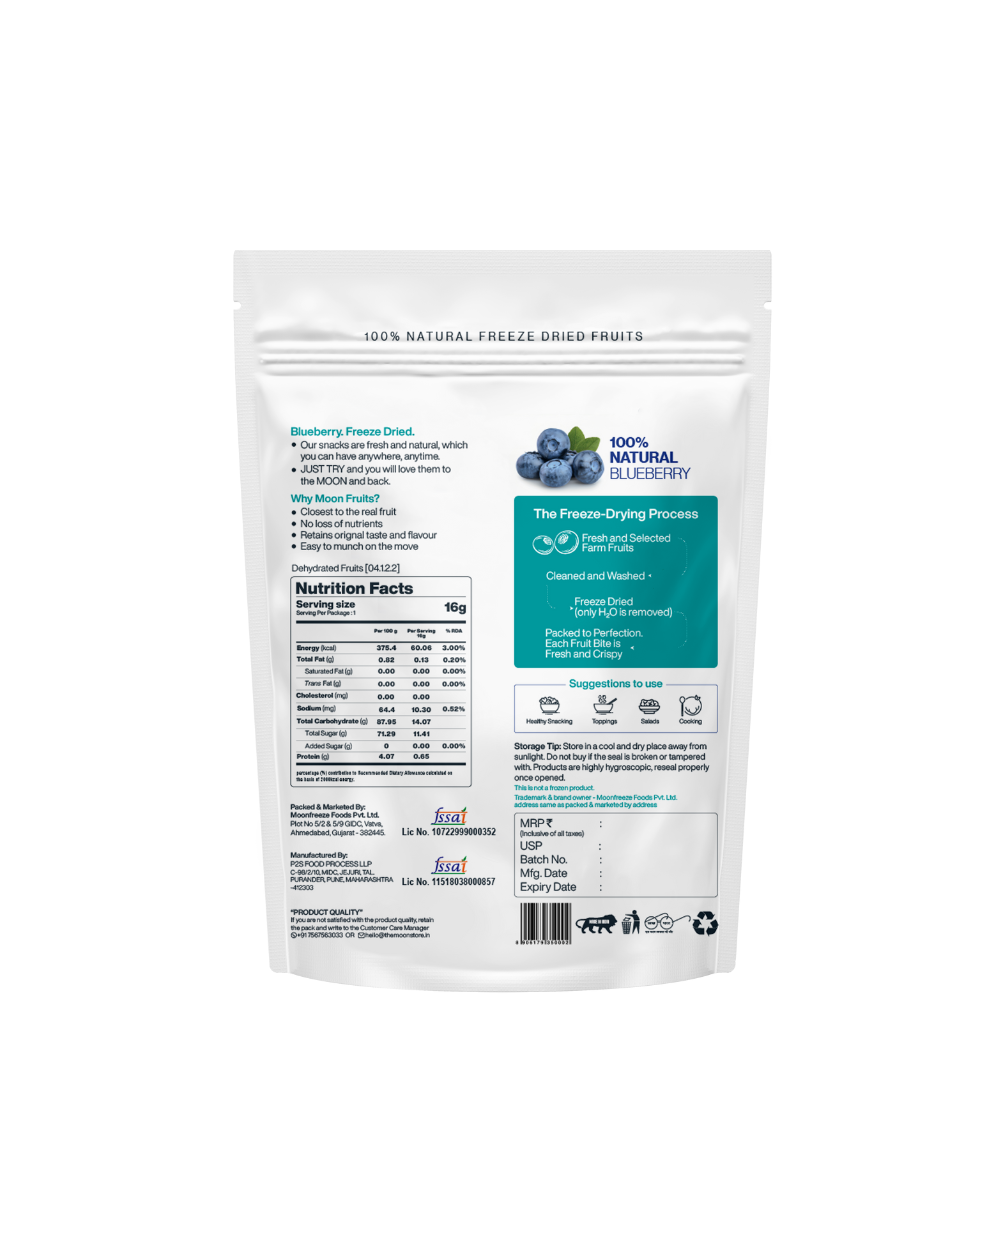 Package of Moon Freeze Dried Strawberry + Blueberry, showing nutritional benefits and product details for sophisticated snacking from MOONFREEZE FOODS PRIVATE LIMITED.